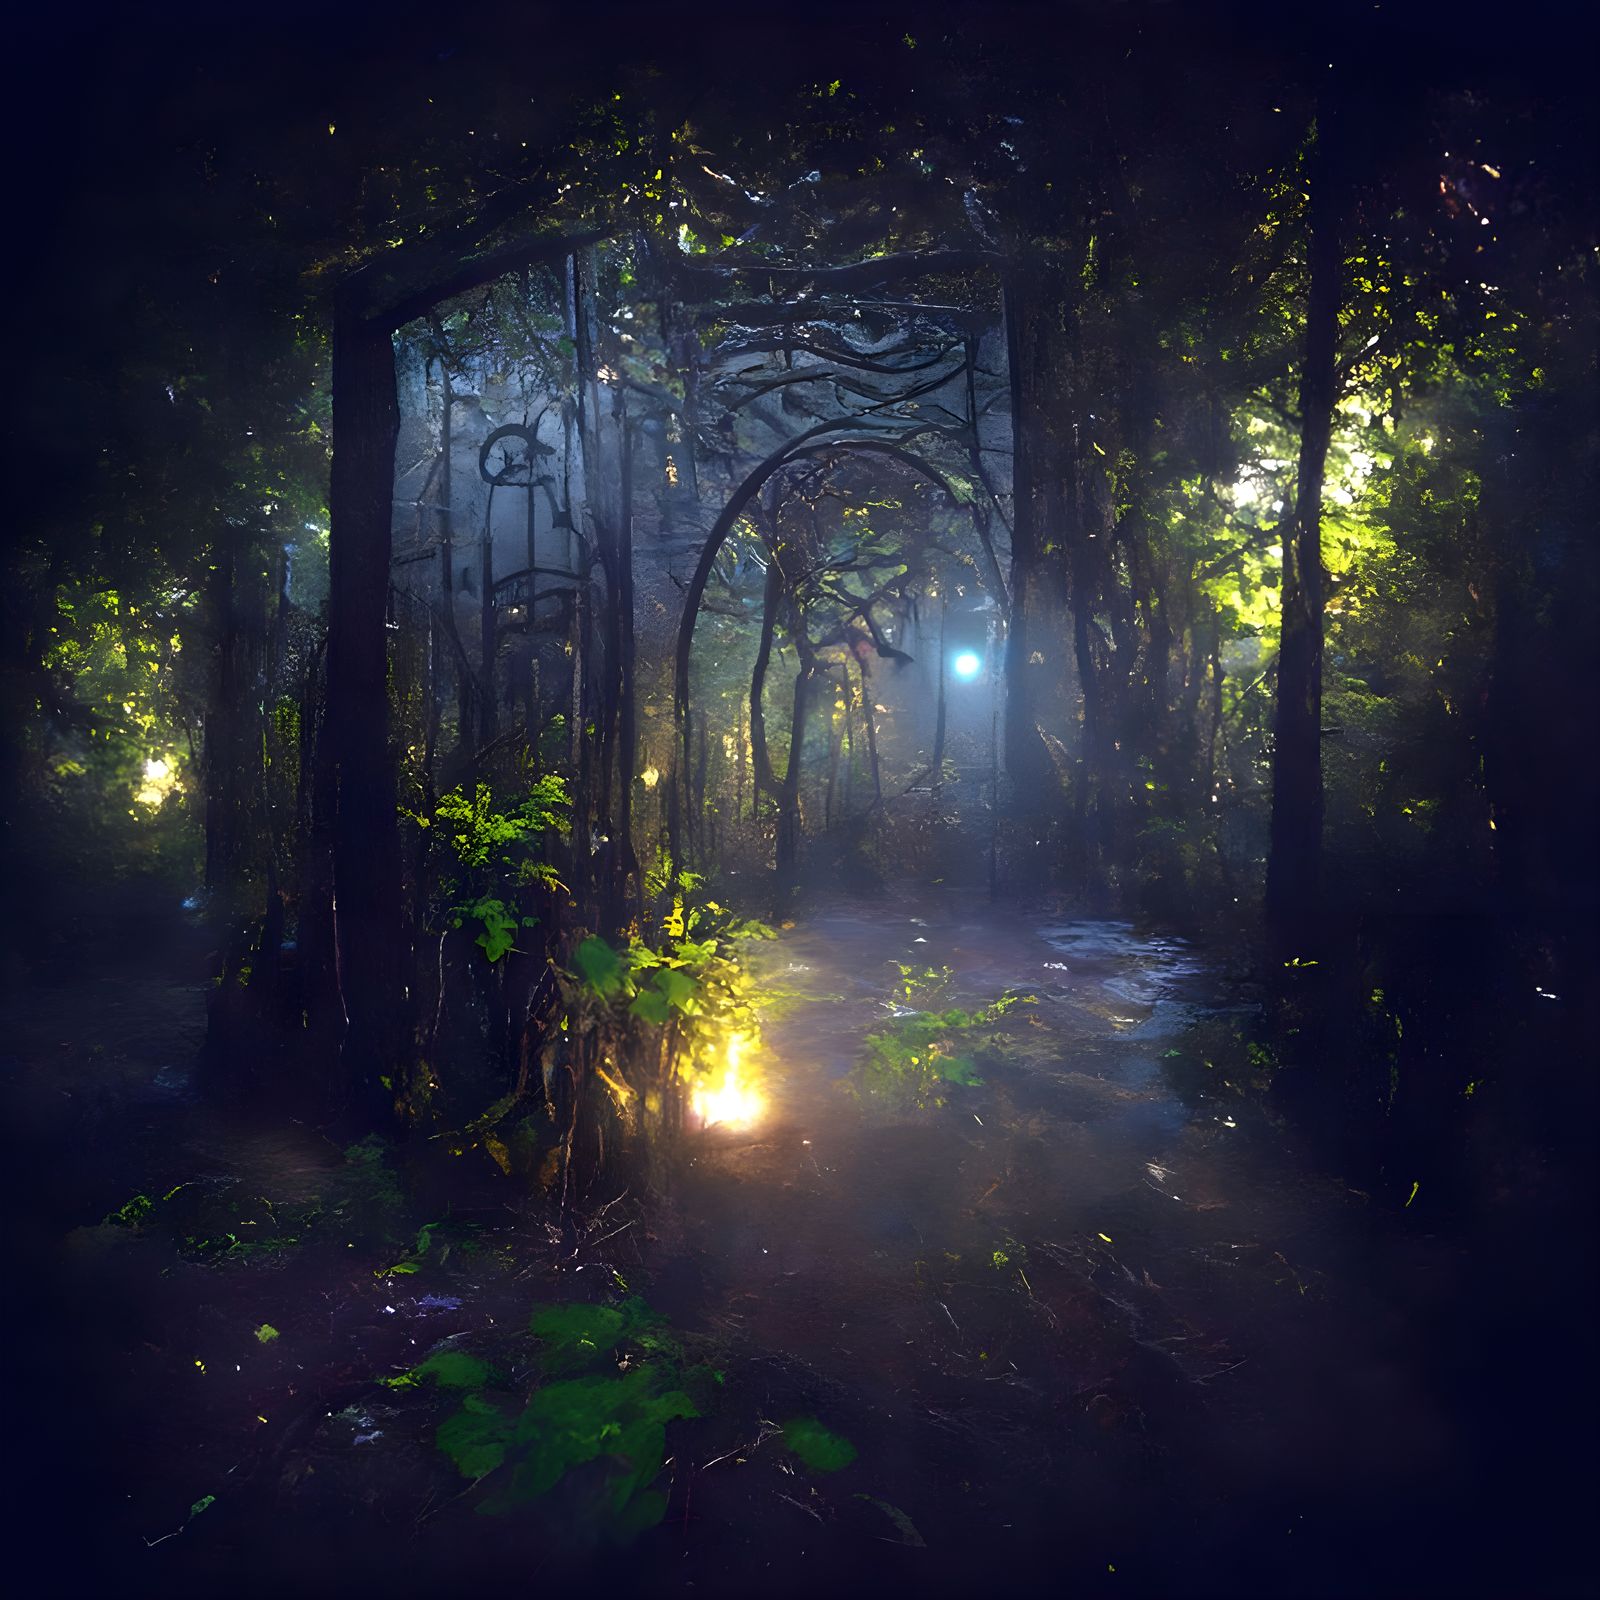 A mystical doorway in a midnight forest